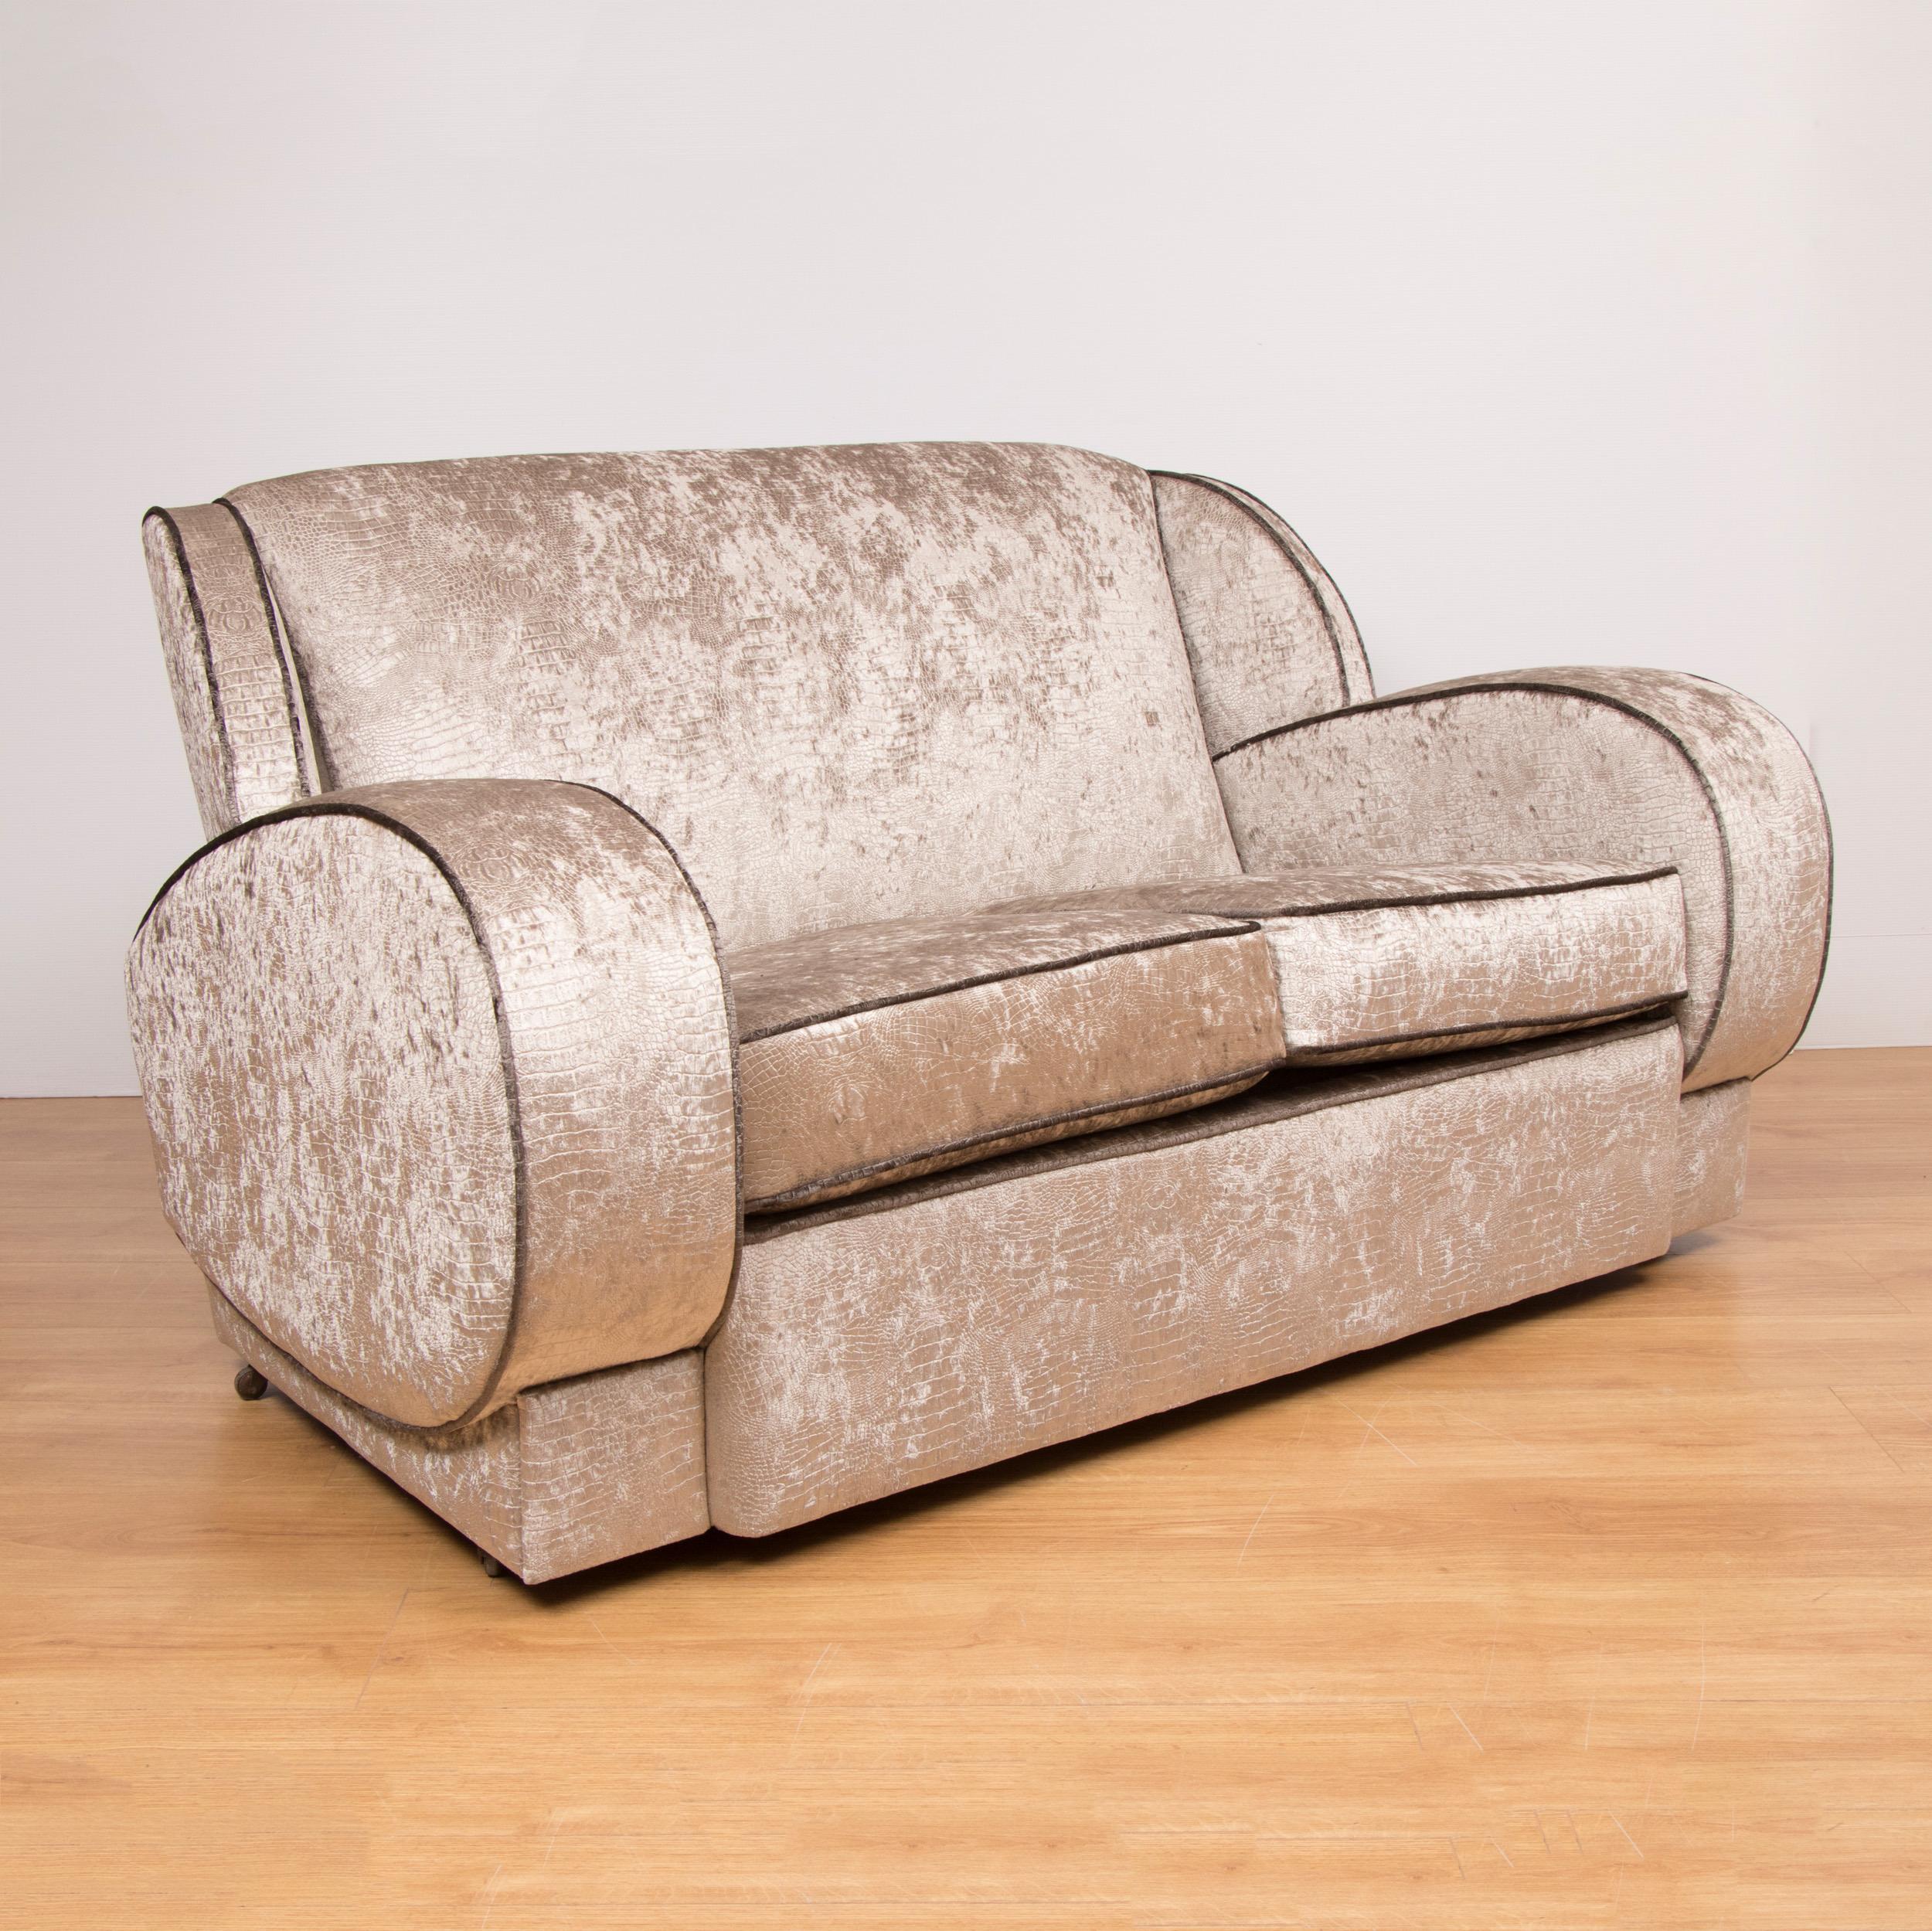 Original Art Deco sofa.
A stunning Art deco two-seat sofa with lovely curved arms, newly upholstered in this amazing silver snakeskin fabric
Sofa 82 cm H 146 cm W 87 cm D seat H 43 cm seat D 56 cm
British, circa 1930.